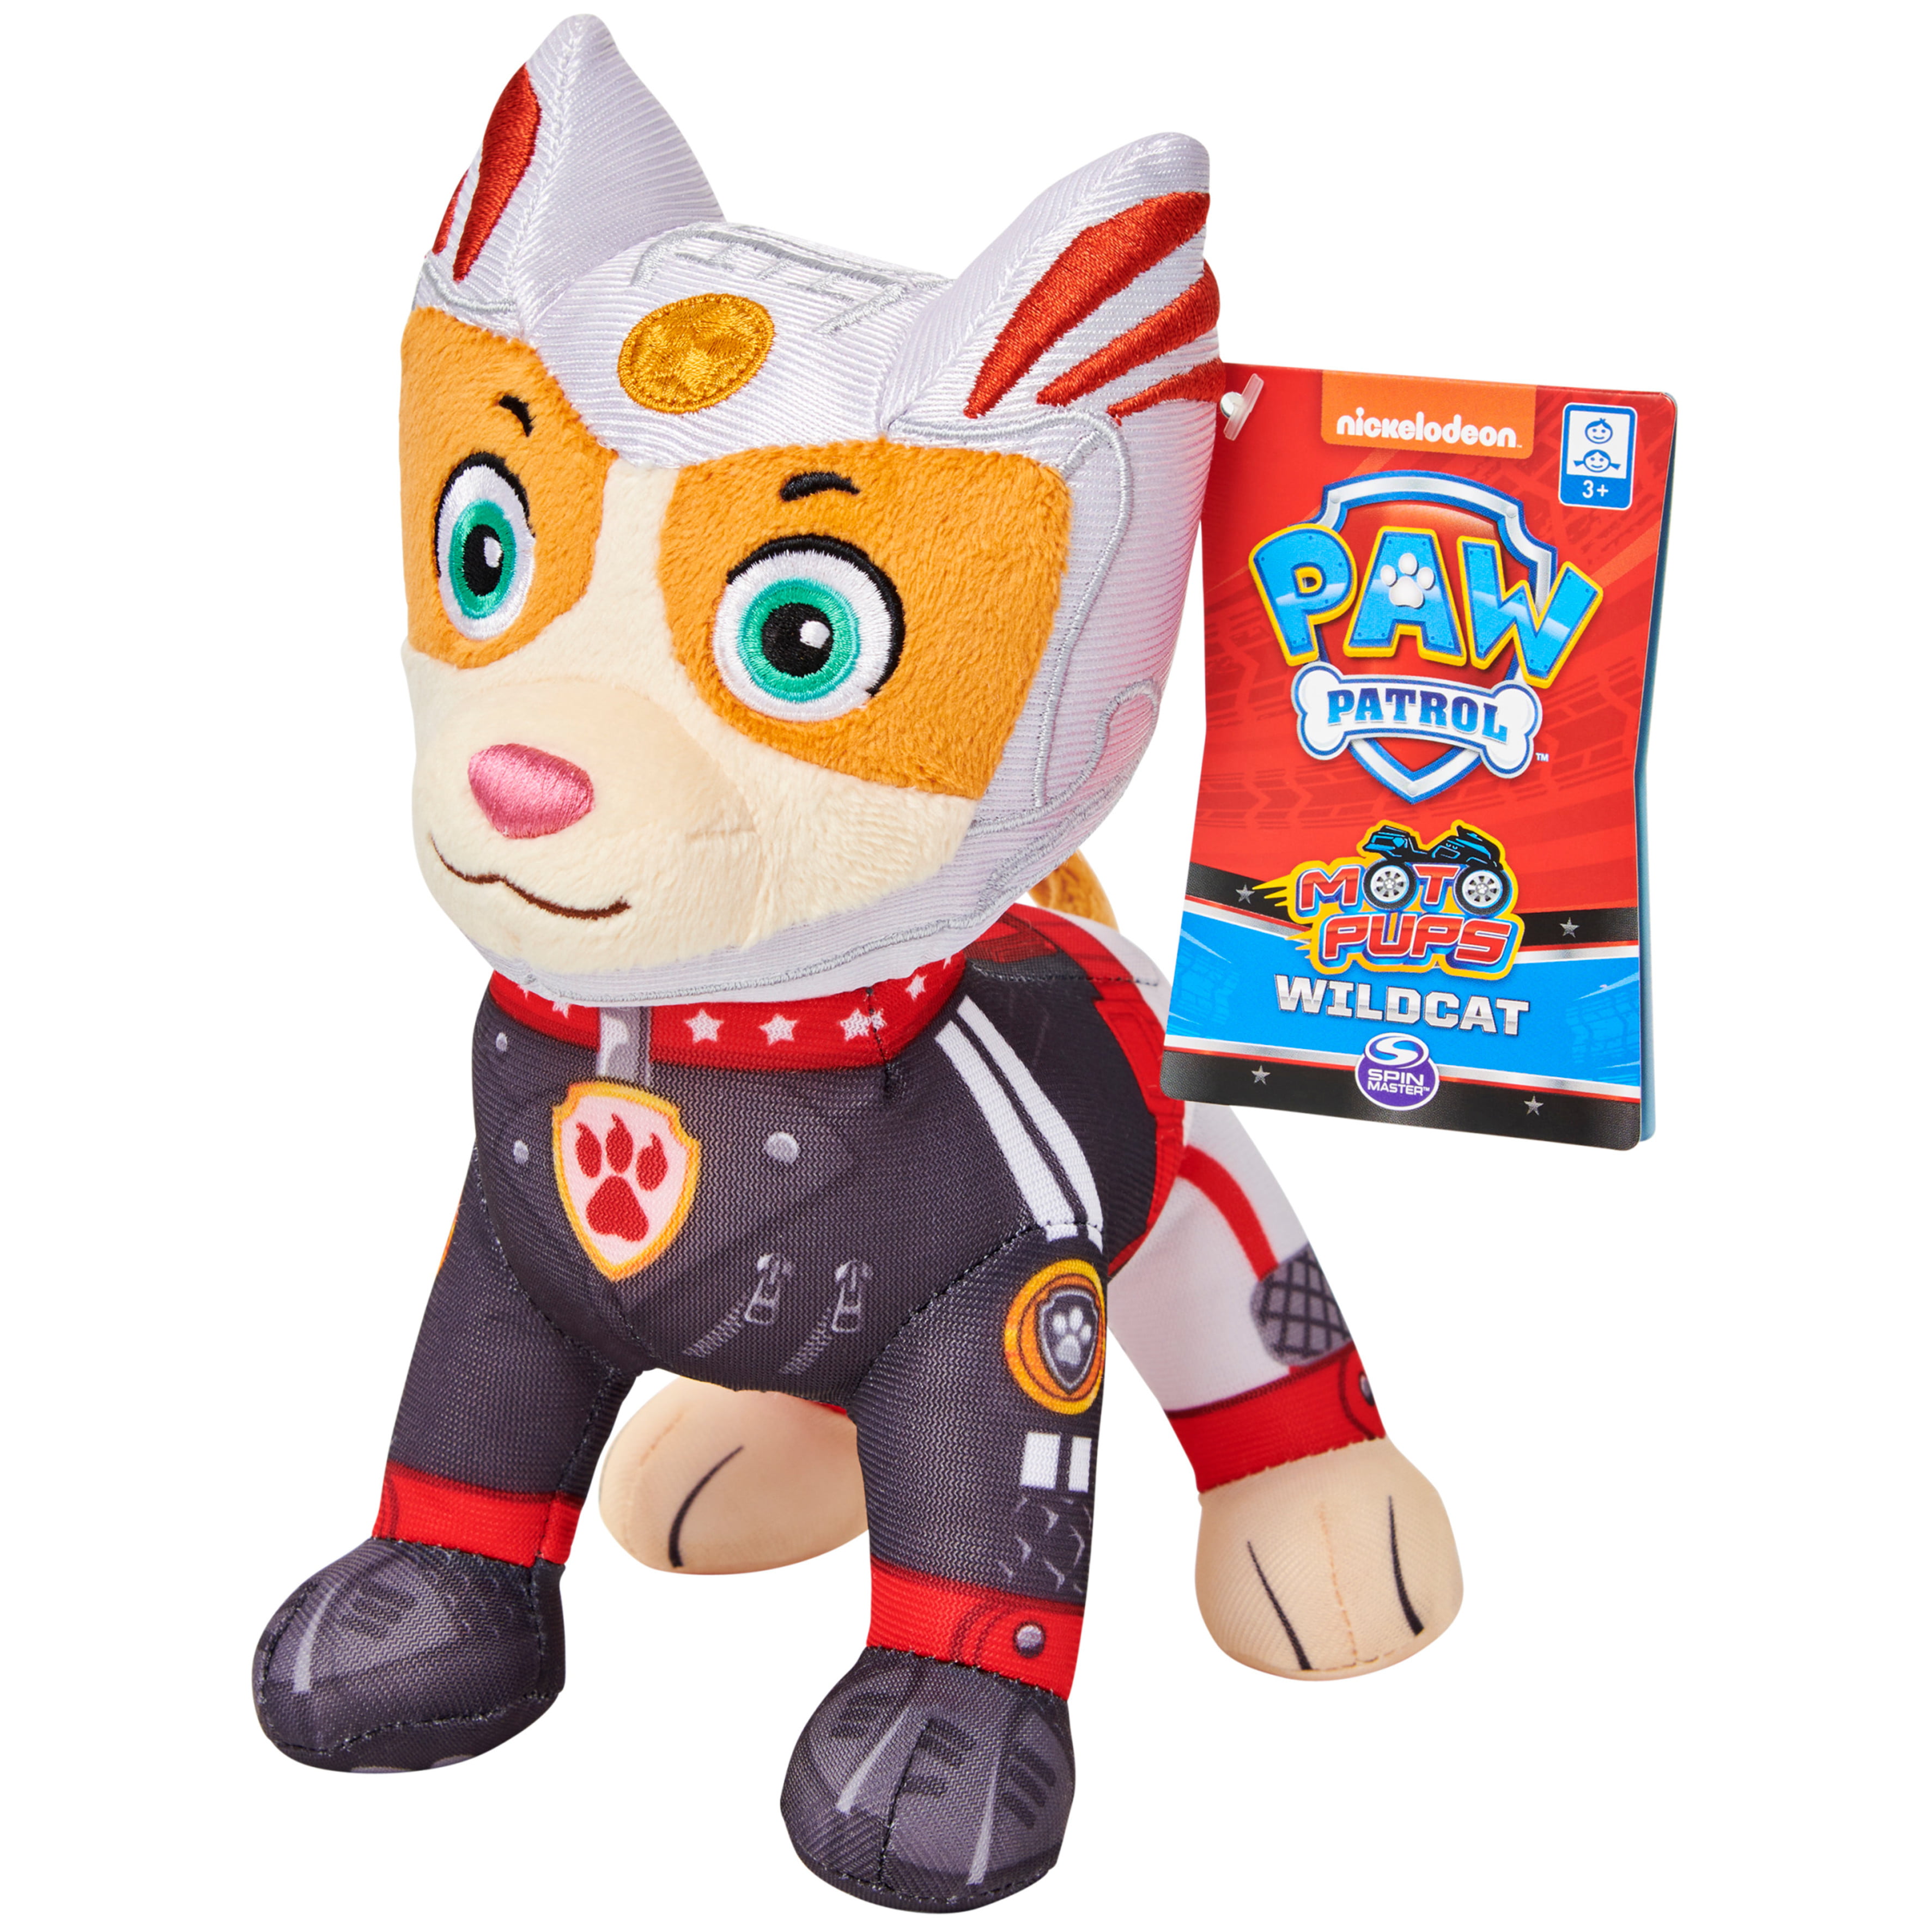 Paw Patrol 8" Plush Pup Pals---Authentic!!! Buy 1 Get 1 25% OFF add 2 to cart 